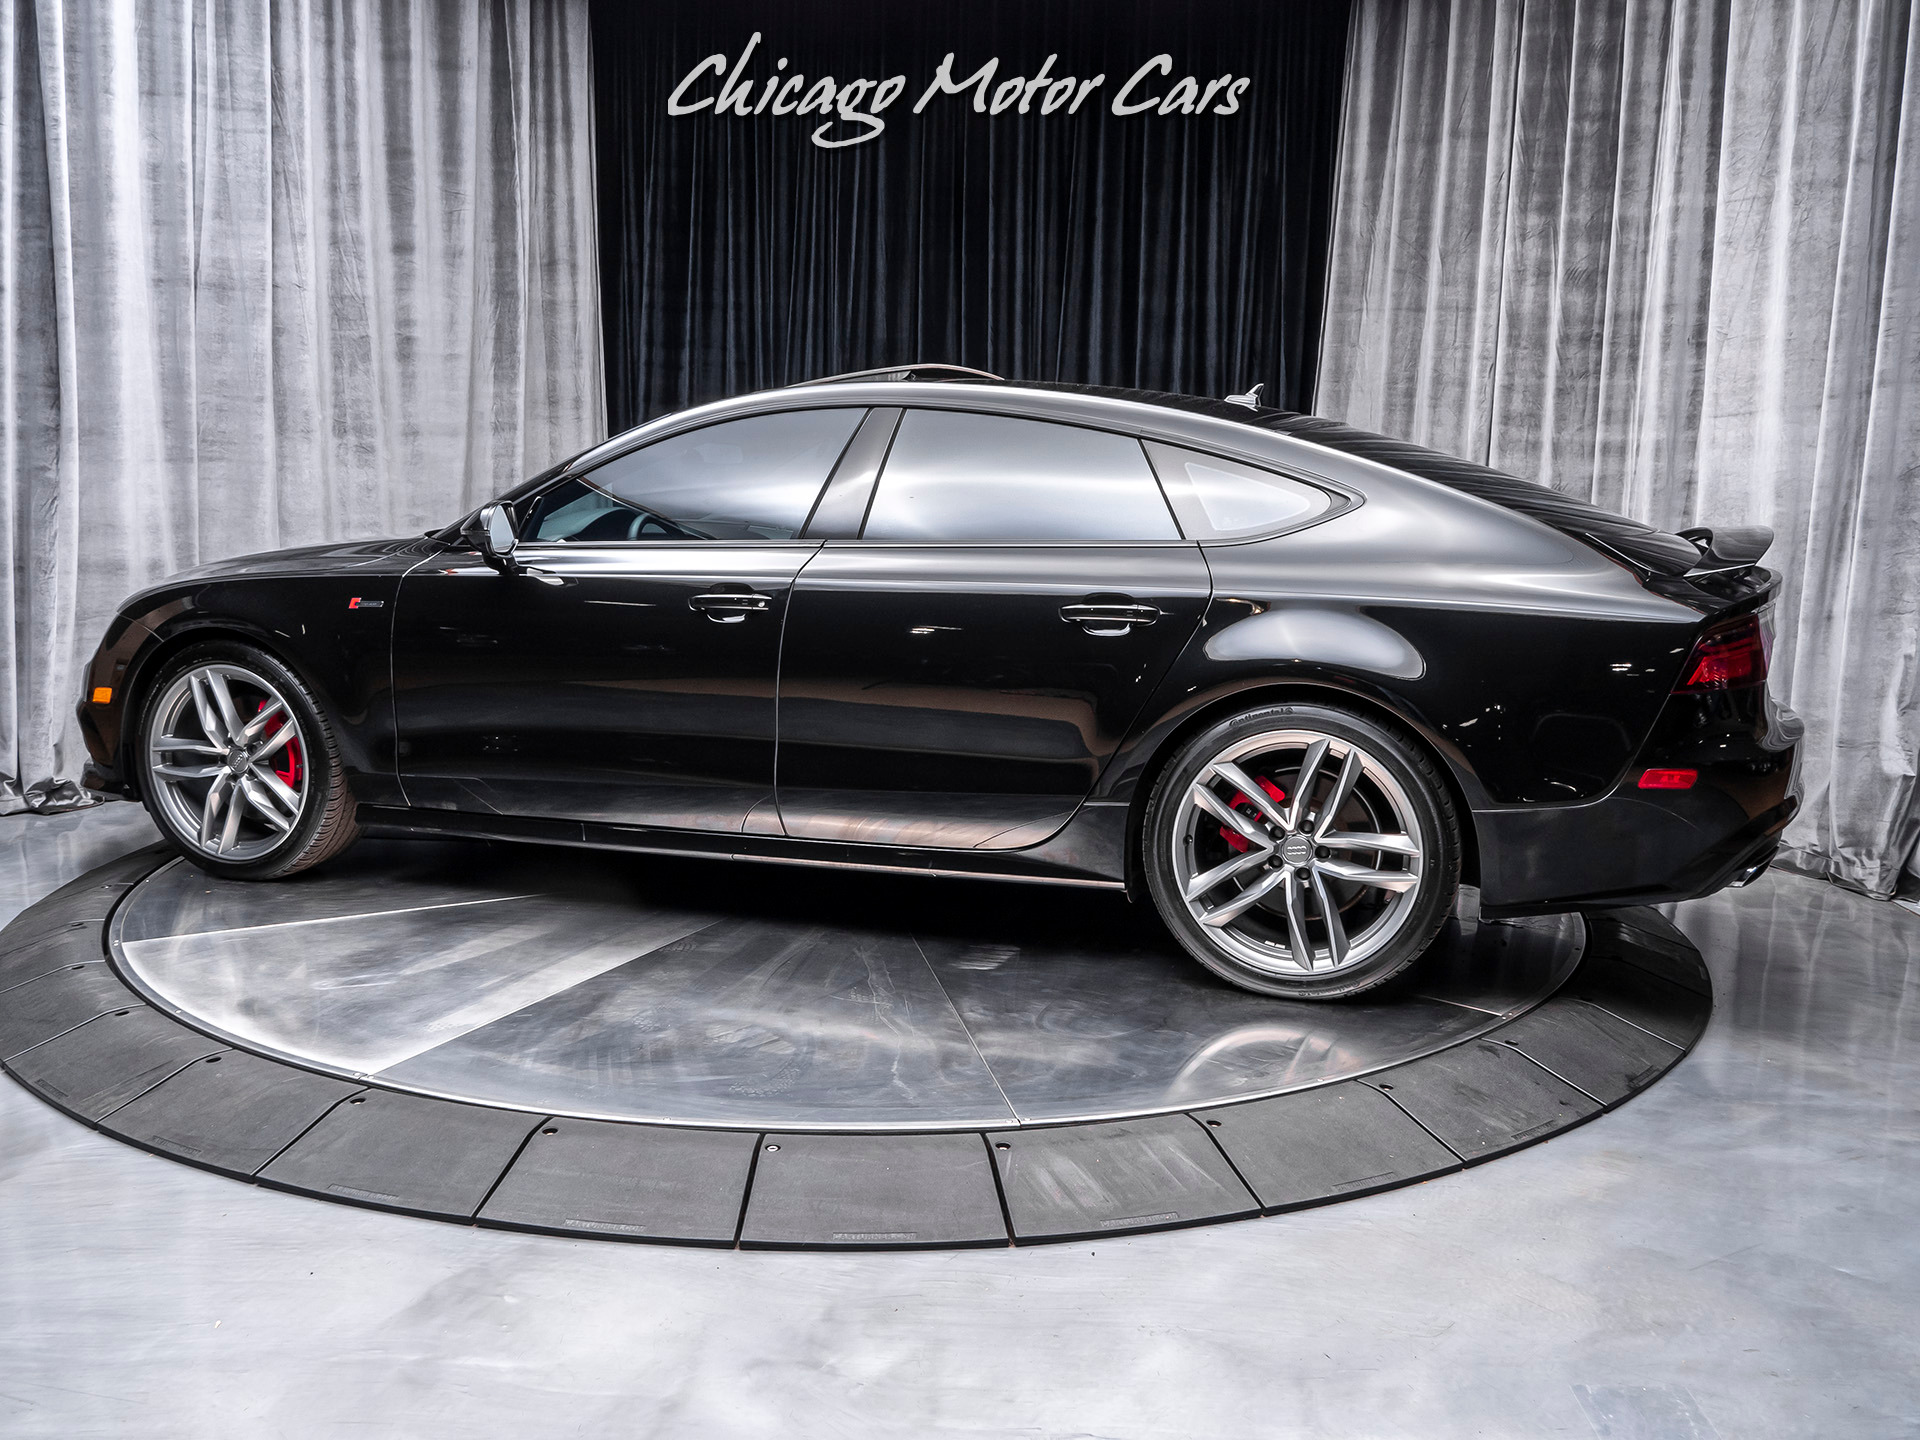 Used 2018 Audi A7 Premium Plus Quattro Hatchback MSRP $76,810+ COMPETITION  PACKAGE! For Sale (Special Pricing) | Chicago Motor Cars Stock #15986